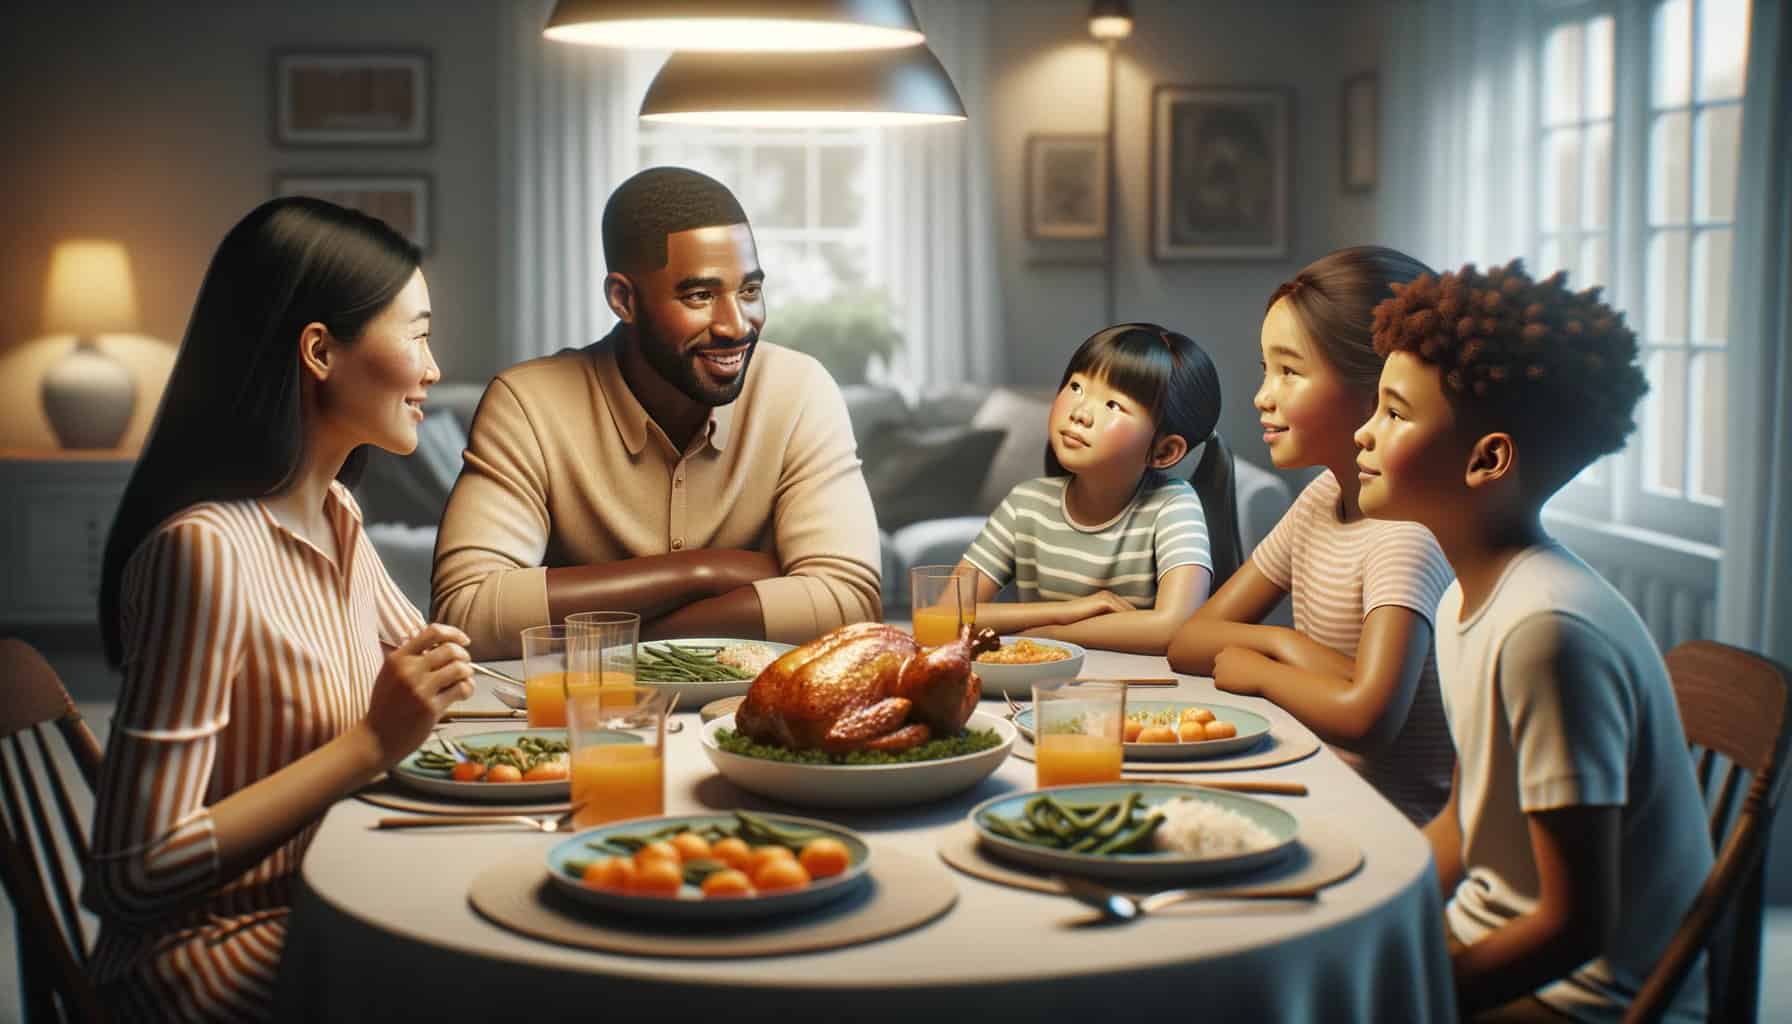 Family seated around a dining table, enjoying a dinner with the apricot preserves chicken dish as the highlight. A mother of asian descent, a father of african descent, and two children - a girl with mixed features and a boy with hispanic features are immersed in conversation. The table has various dishes, with the apricot preserves chicken taking center stage.